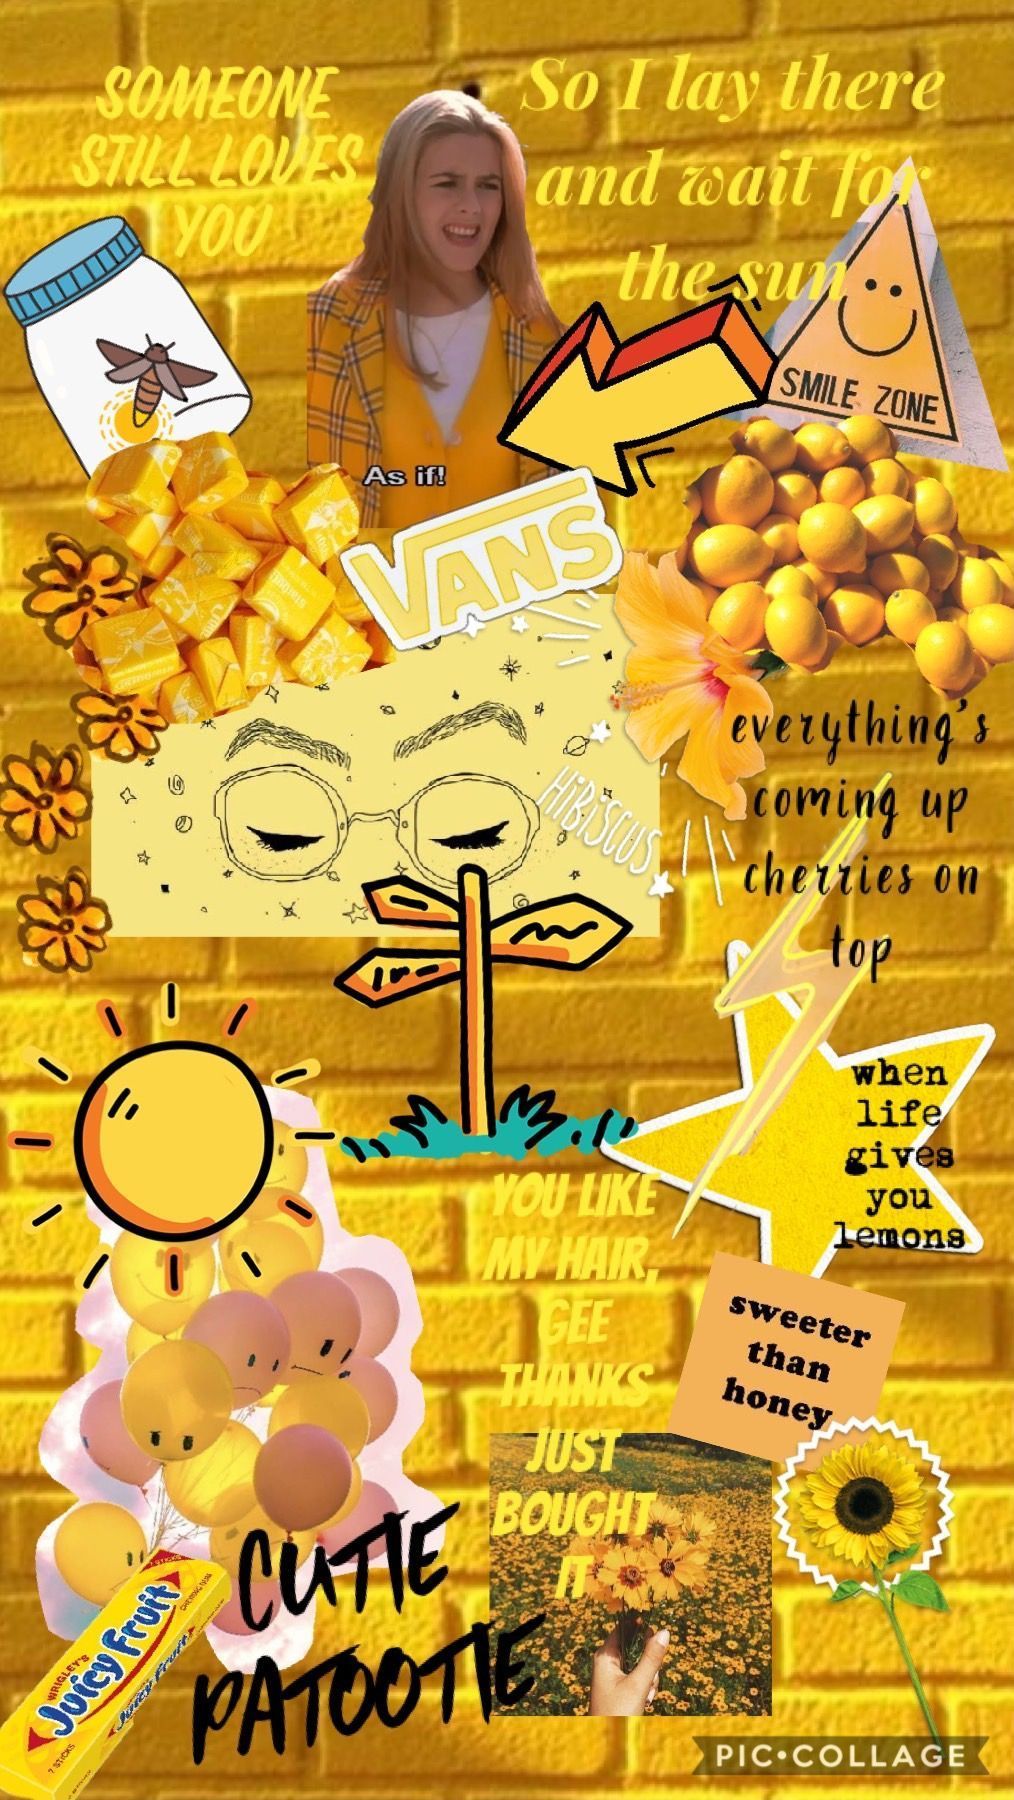 Aesthetic background for a yellow themed phone. - Sunshine